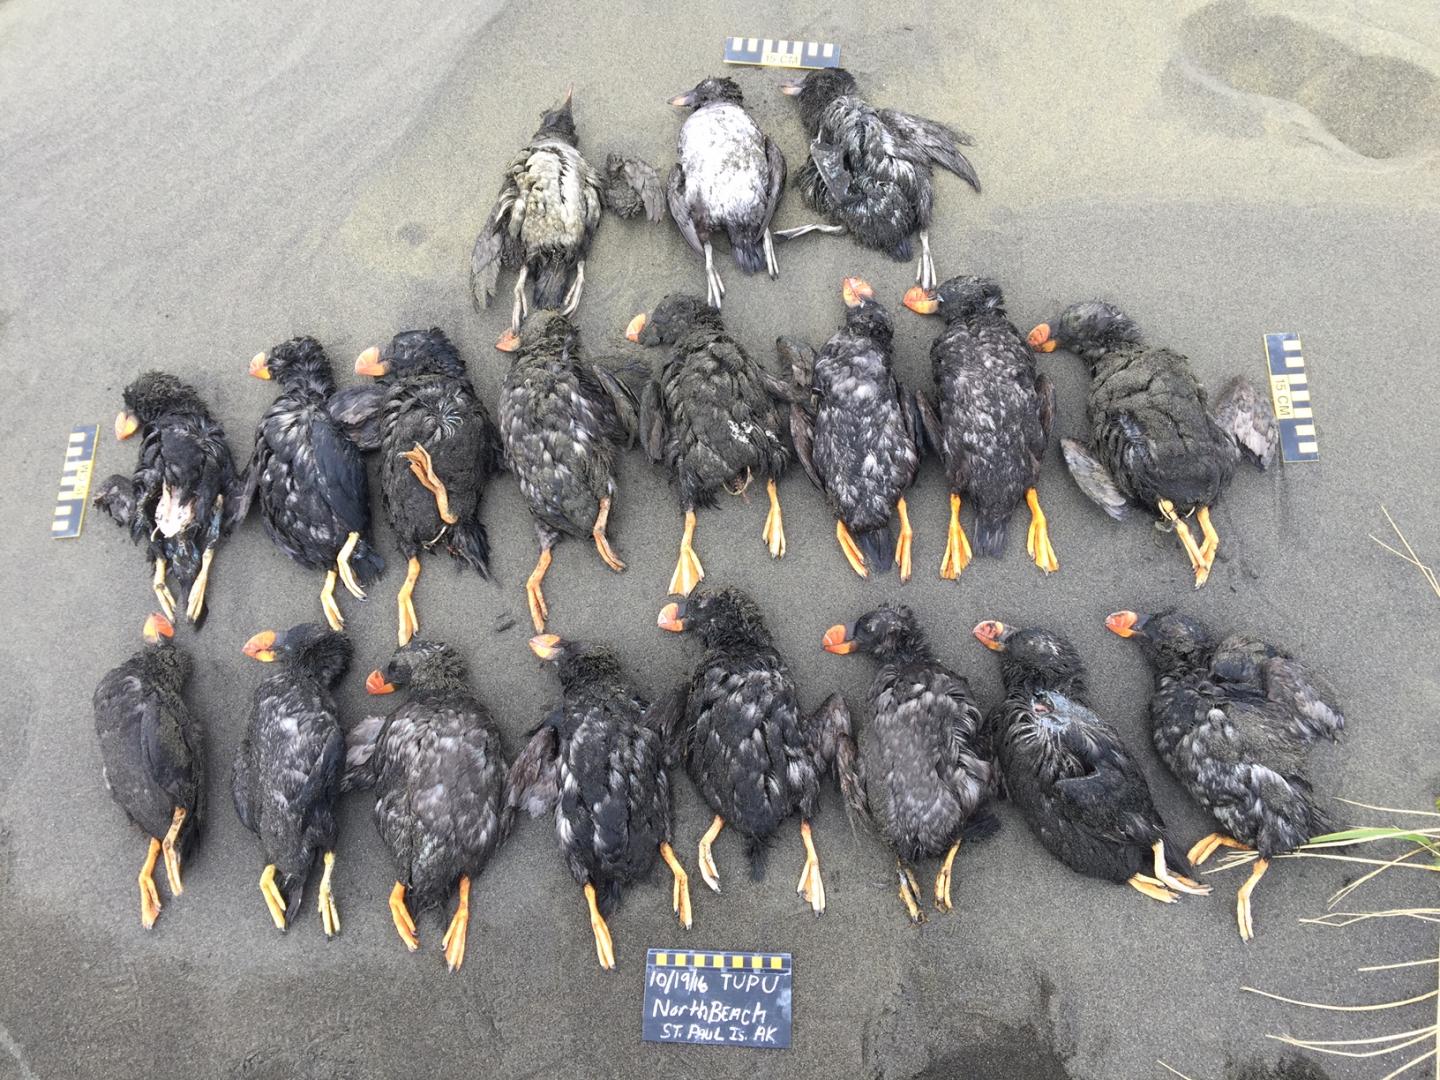 Mass Die-off of Puffins Recorded in the Bering Sea